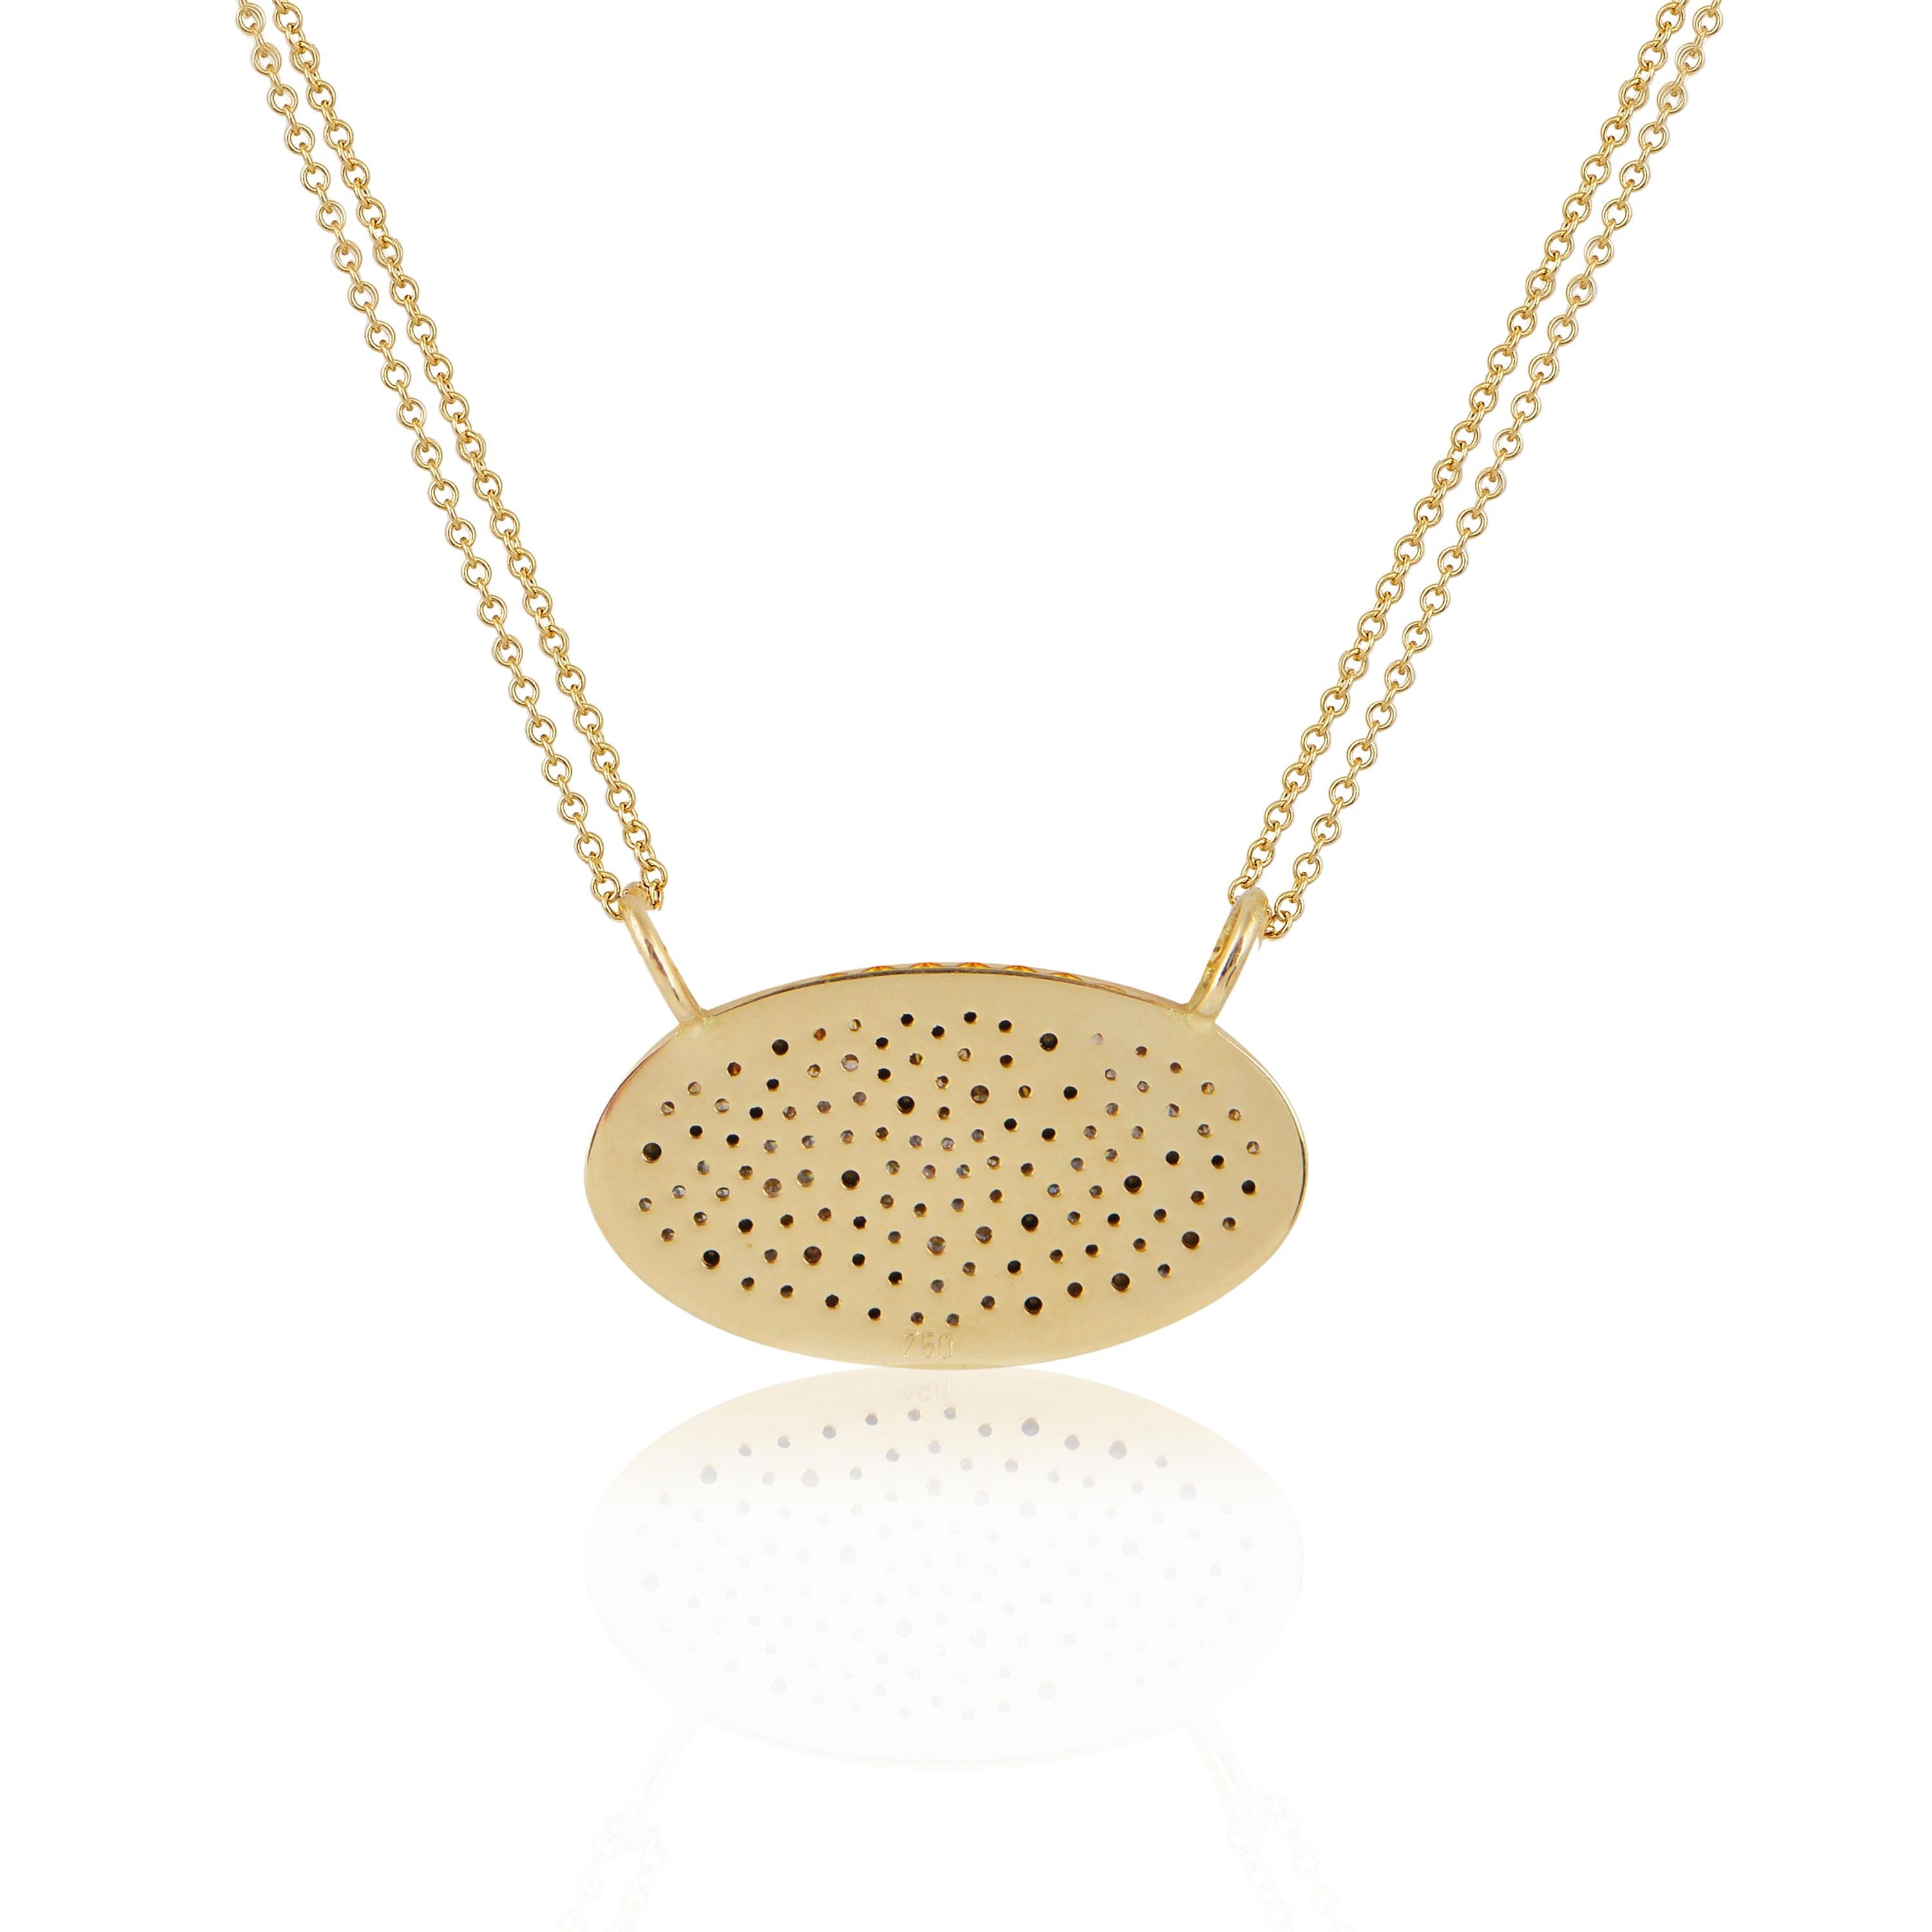 Designer: Alexia Gryllaki

Dimensions: motif 23x13mm, double-chain 800mm (half when folded)
Weight: approximately 5.9g 
Barcode: NEX2003


Leopard print oval pendant in 18 karat yellow gold with a double-chain and mosaic pavé made of round